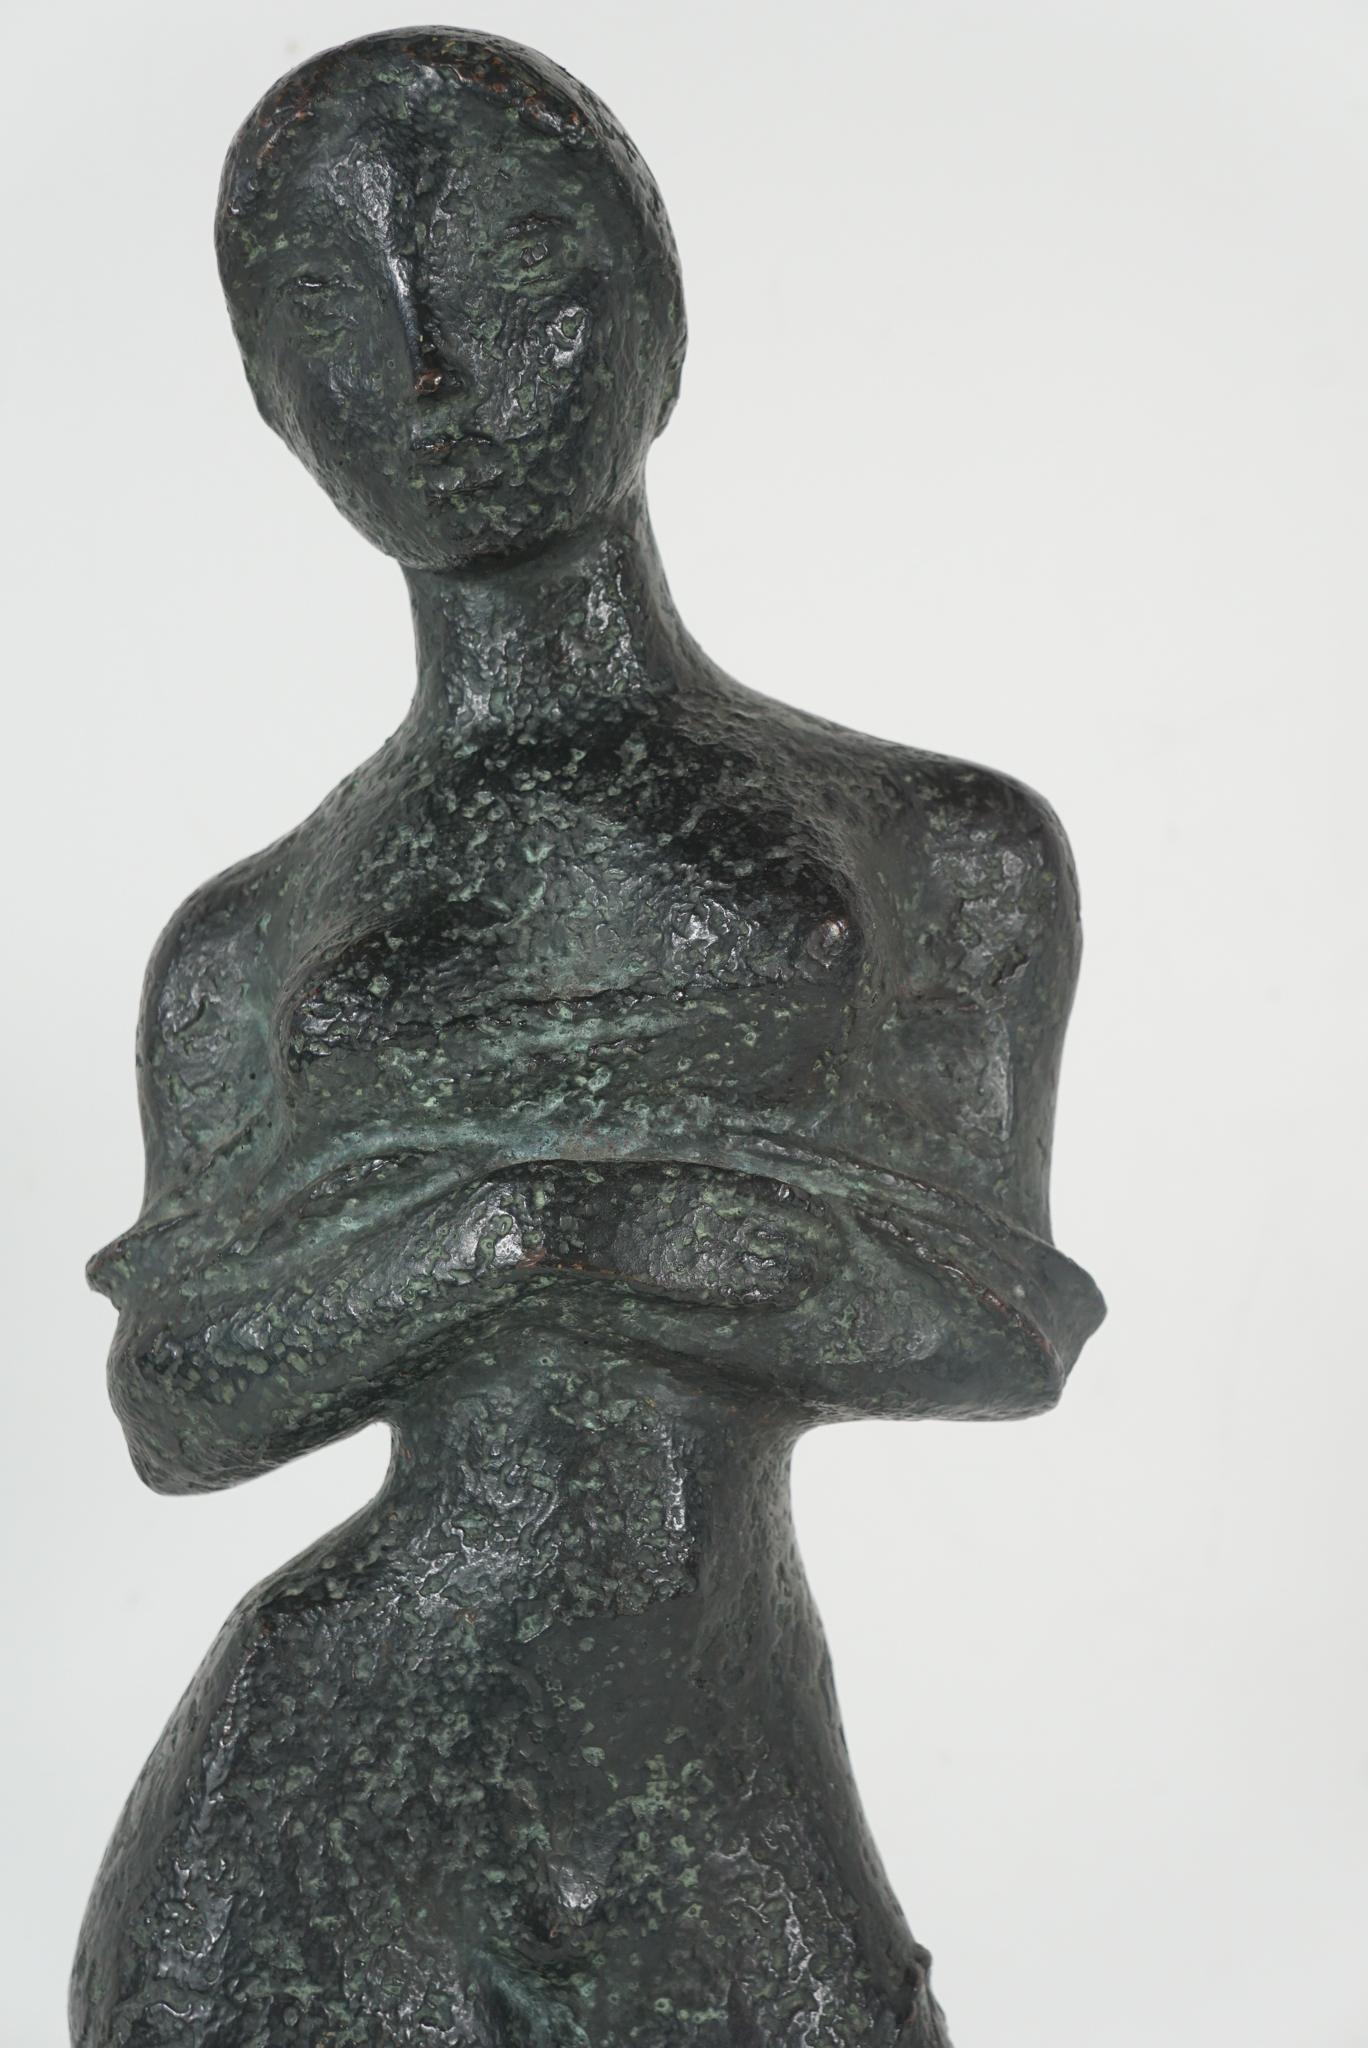 this work by famed Sculpture and Painter Georges Oudot was cast circa 1955 and bears his signature and the mark EA indicating its an artist proof, the foundry stamp of Susse Fondeur Paris. Entitled “Femme Debout au Drape” the work is dynamic and